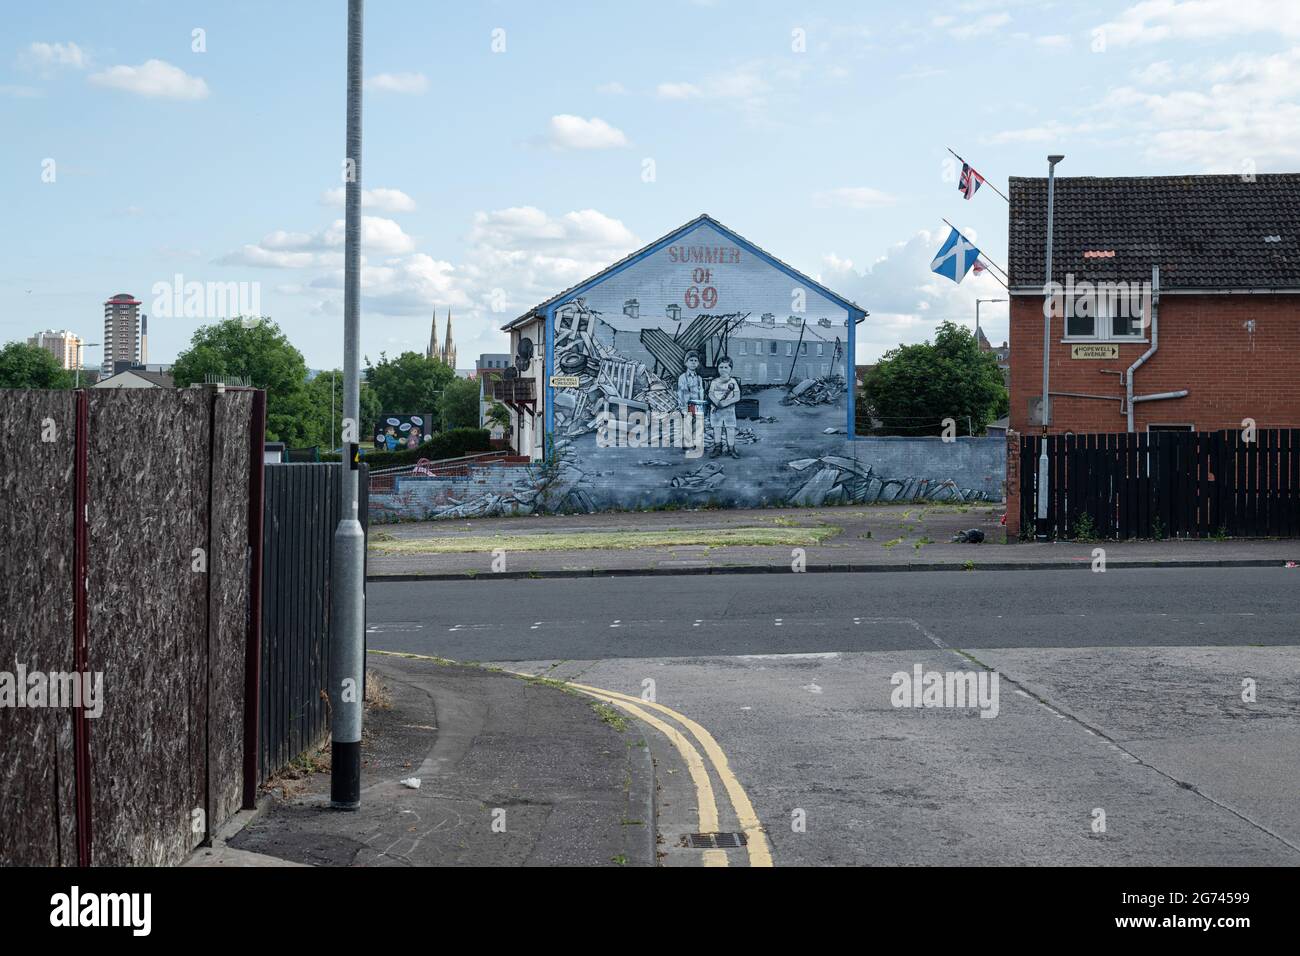 The ìSummer of '69î mural at Hopewell Crescent off the Crumlin road in the Shankil estate, which depicts the devastation which occurred during the Summer of 1969. Communities on both sides fear a return to a volatile state in the North due to fresh tensions as a result of post Brexit protocols. Preparations in lieu of July 11th bonfire night in Belfast before the annual July 12th Orange Order marches. This year marks the centenary of the formation of Northern Ireland and is also the first permitted Orange marches since the beginning of the pandemic. The marching season has fallen during a tens Stock Photo